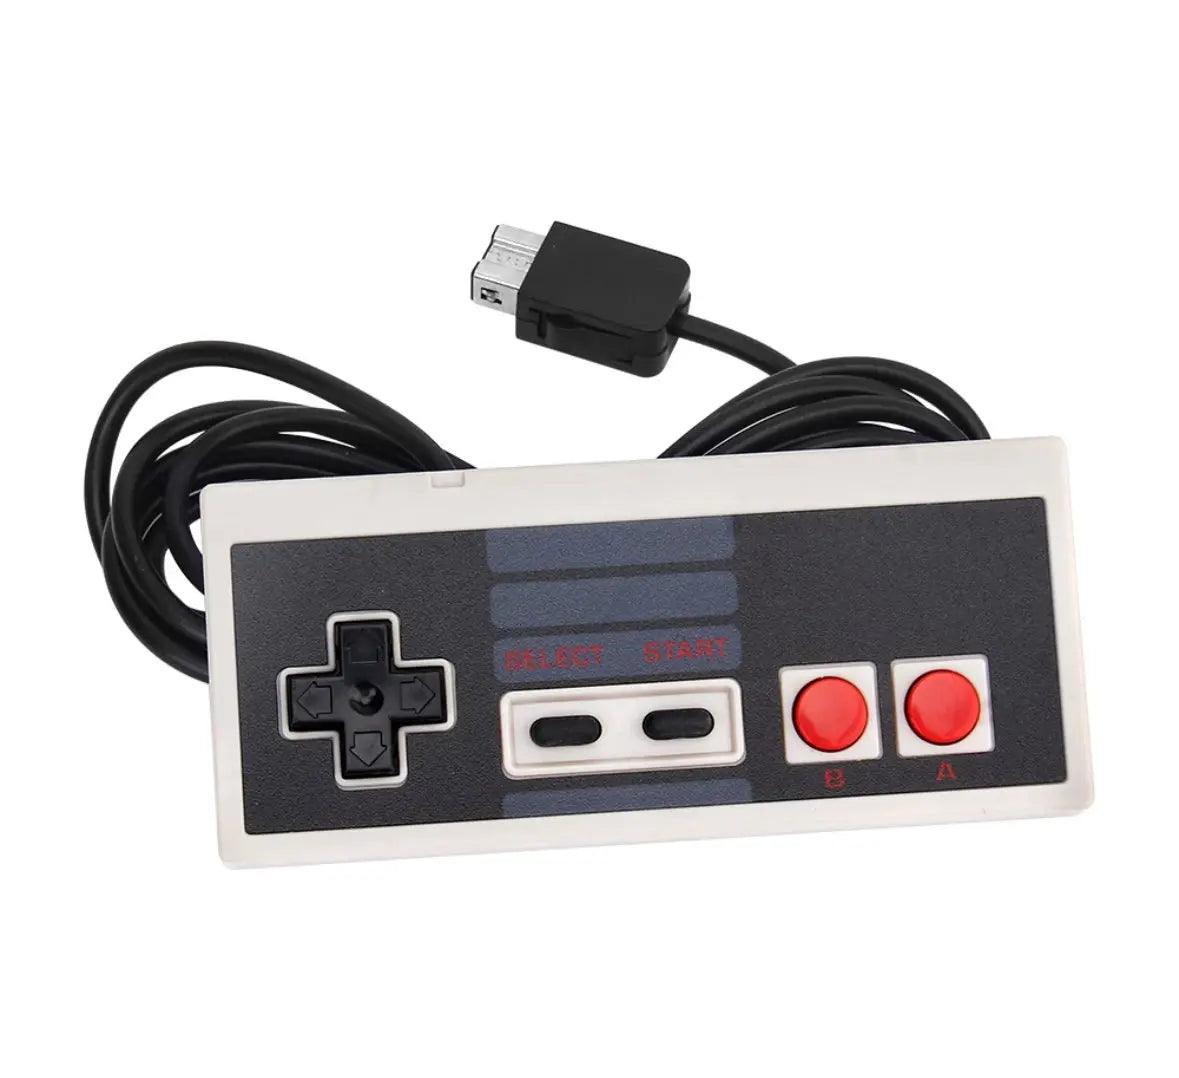 NES Classic Wired Controller - 8BitHero